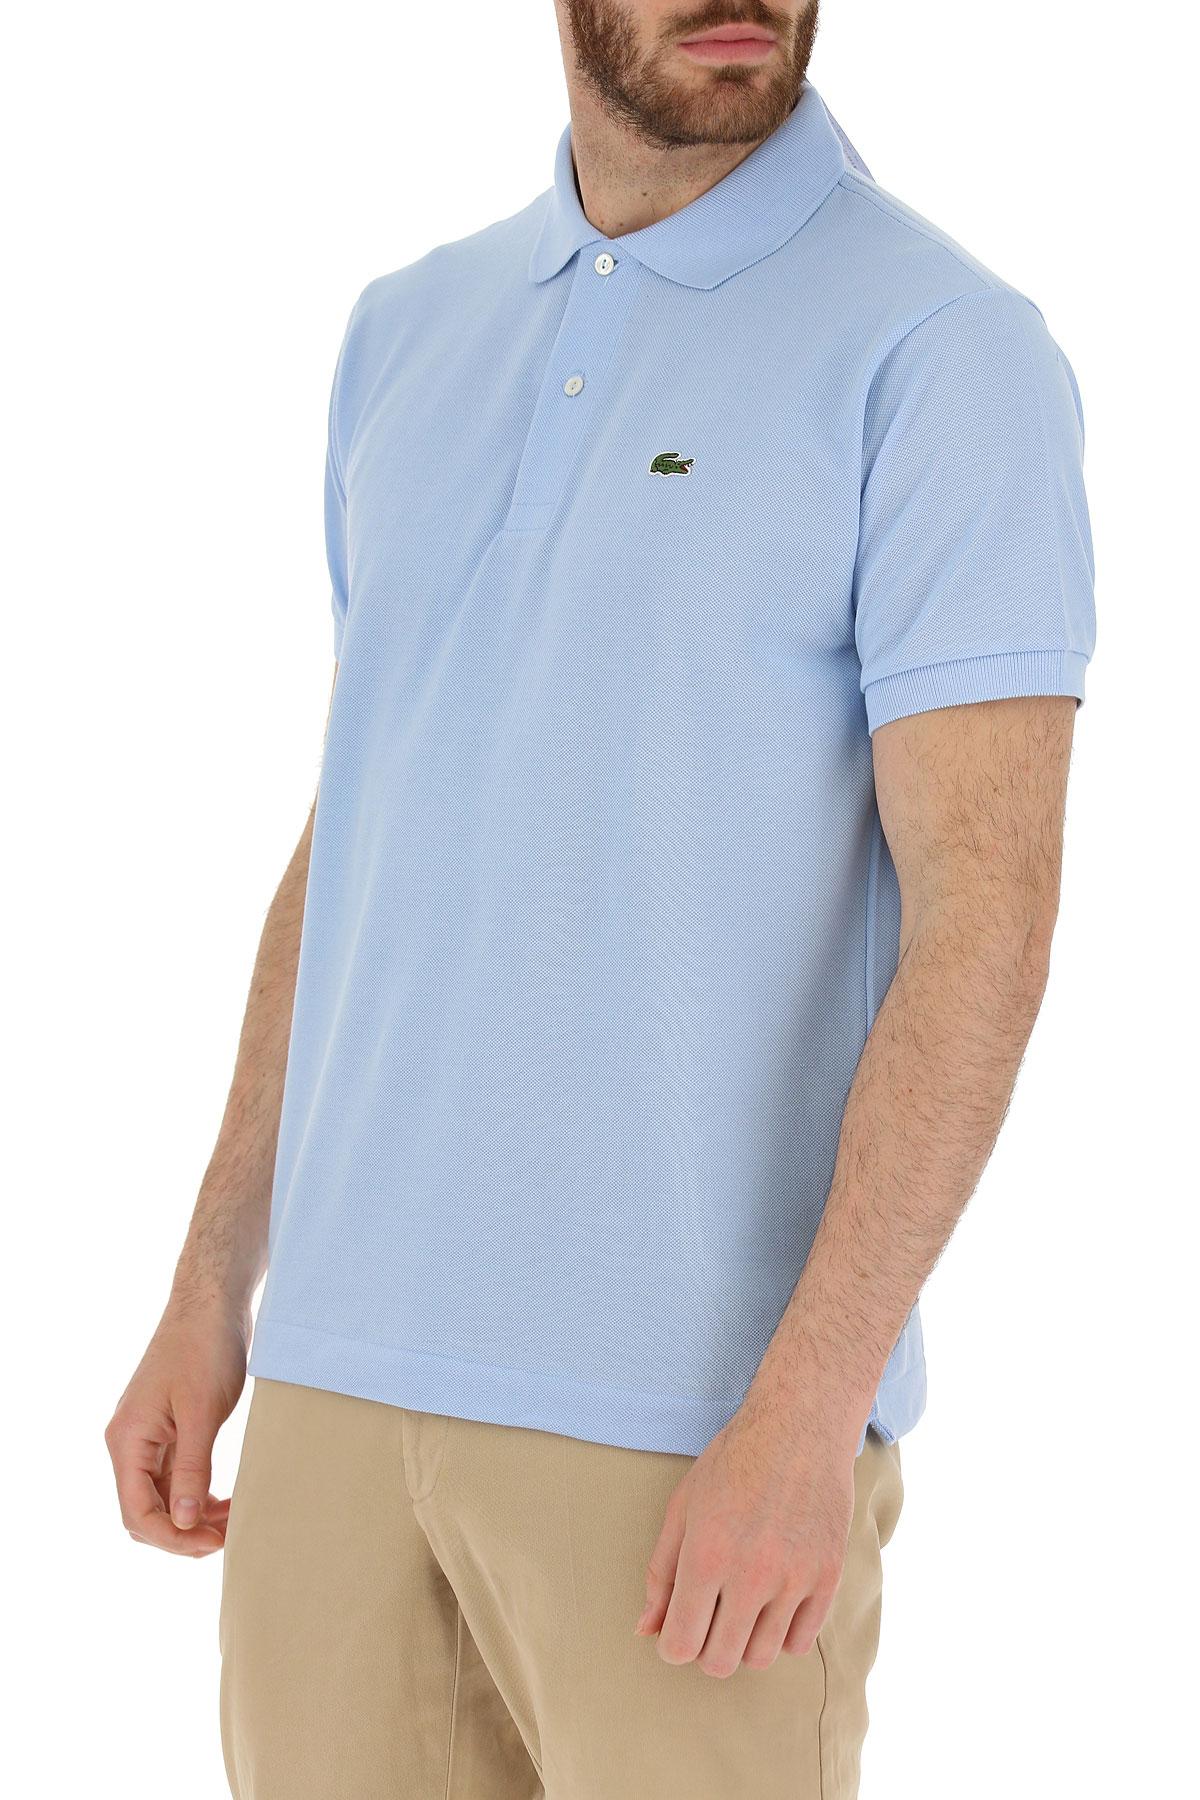 Lacoste Cotton Polo Shirt For Men in 